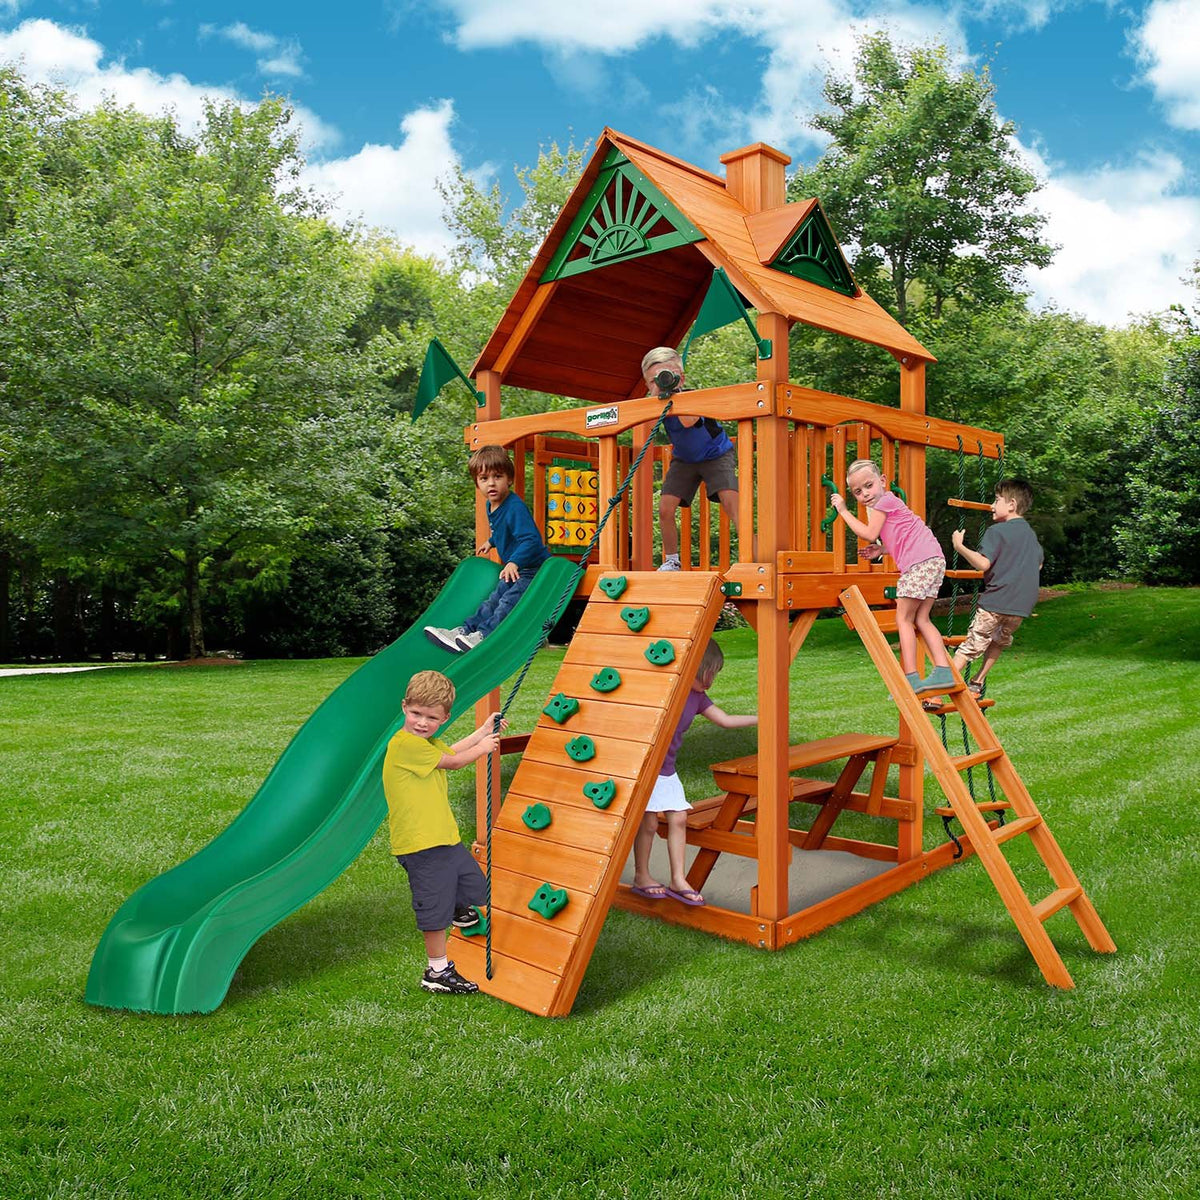 Gorilla-Playsets-Chateau-Tower-Wooden-Swingset-Side-1